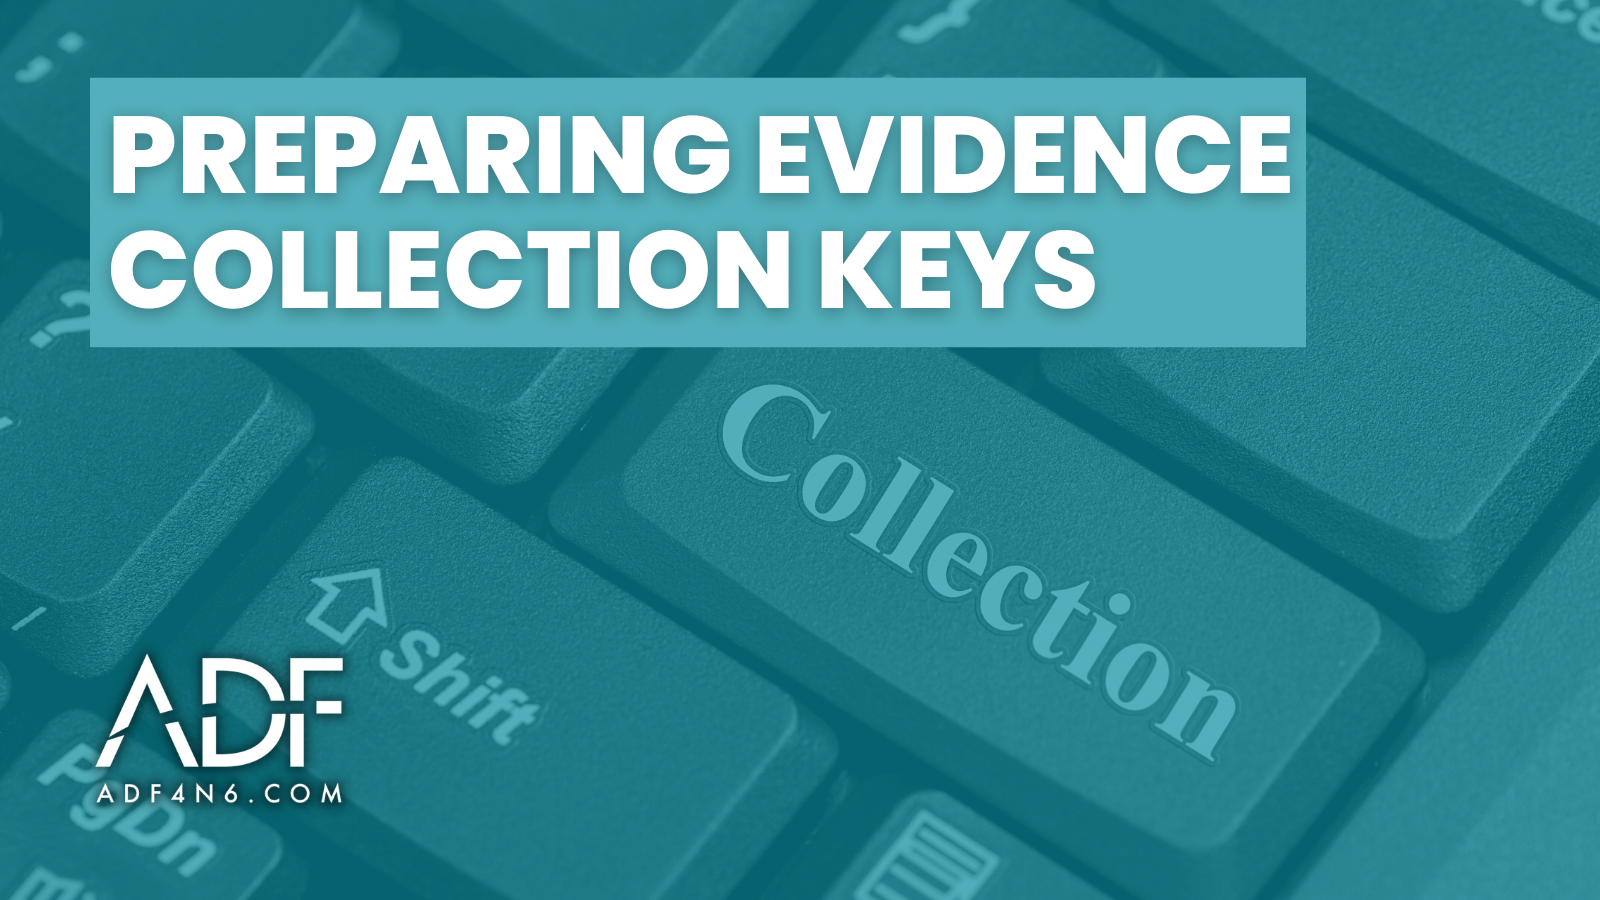 Prepare Evidence Collection Keys for a Digital Forensic Investigation (Updated in 2022)